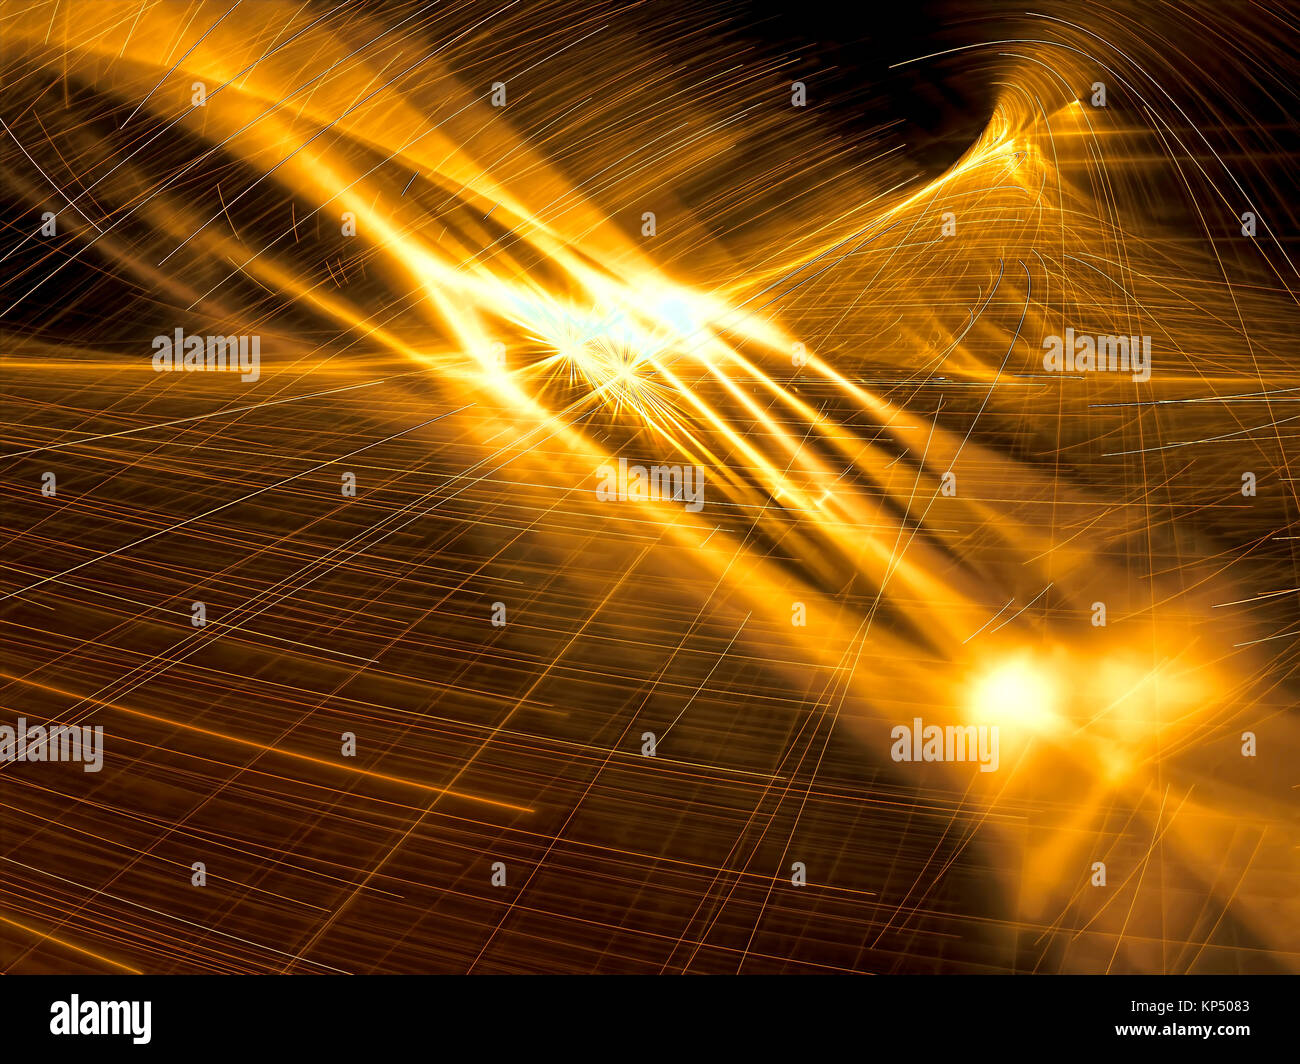 Abstract technology style background - digitally generated image Stock Photo